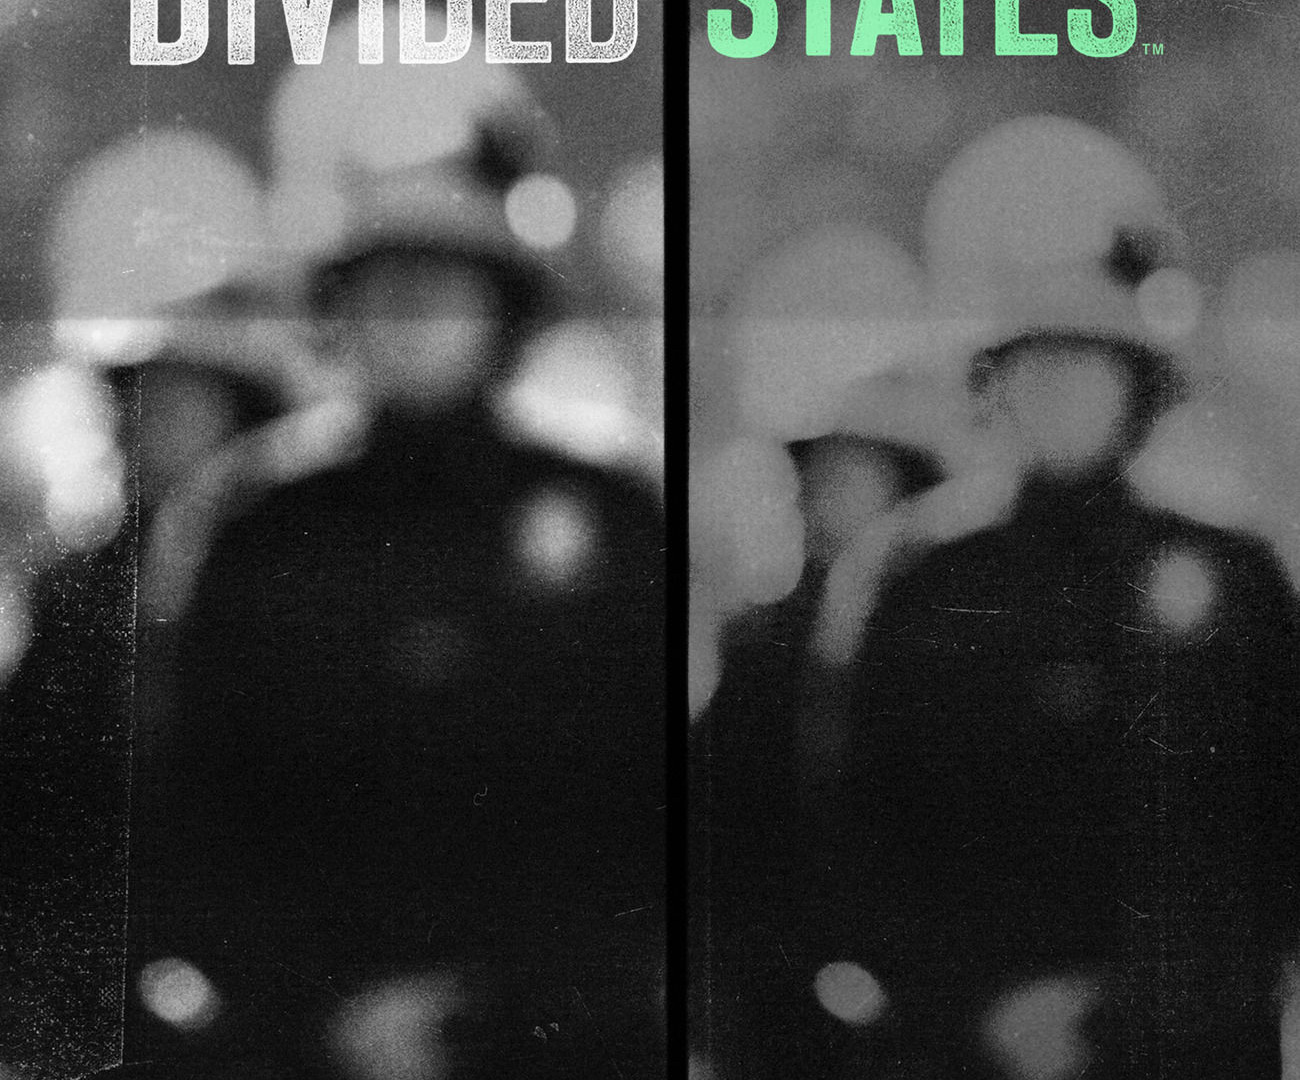 Show Divided States